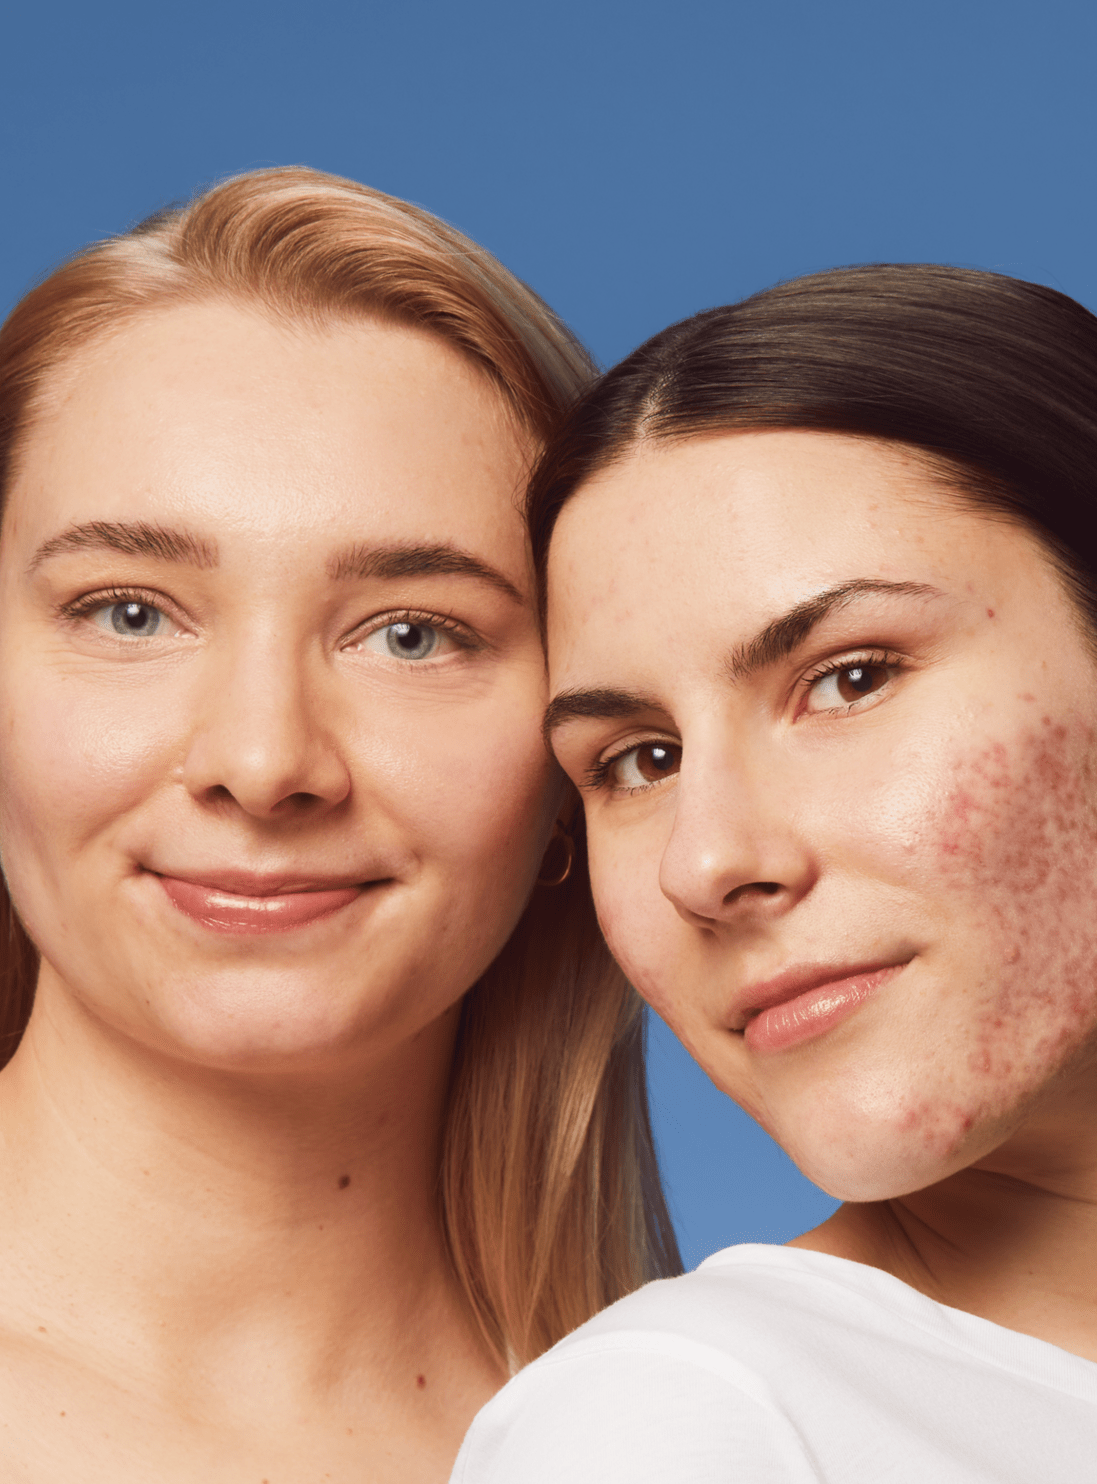 one girl with clear skin & one with acne